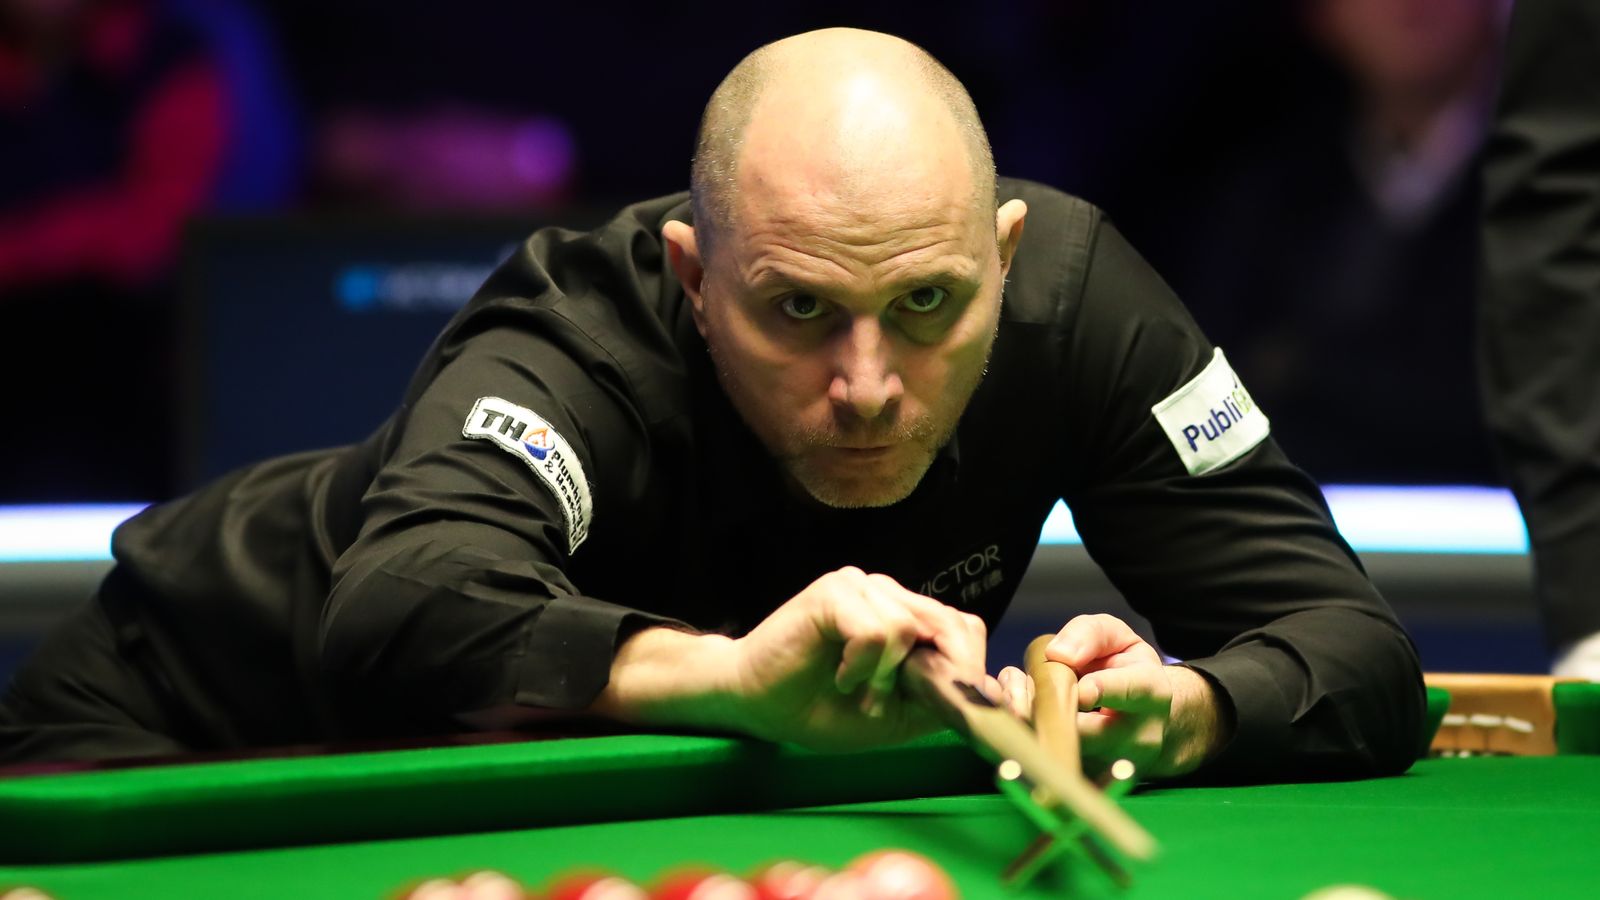 world-snooker-championship-joe-perry-felt-physically-sick-after-beating-mark-davis-to-qualify-for-the-crucible